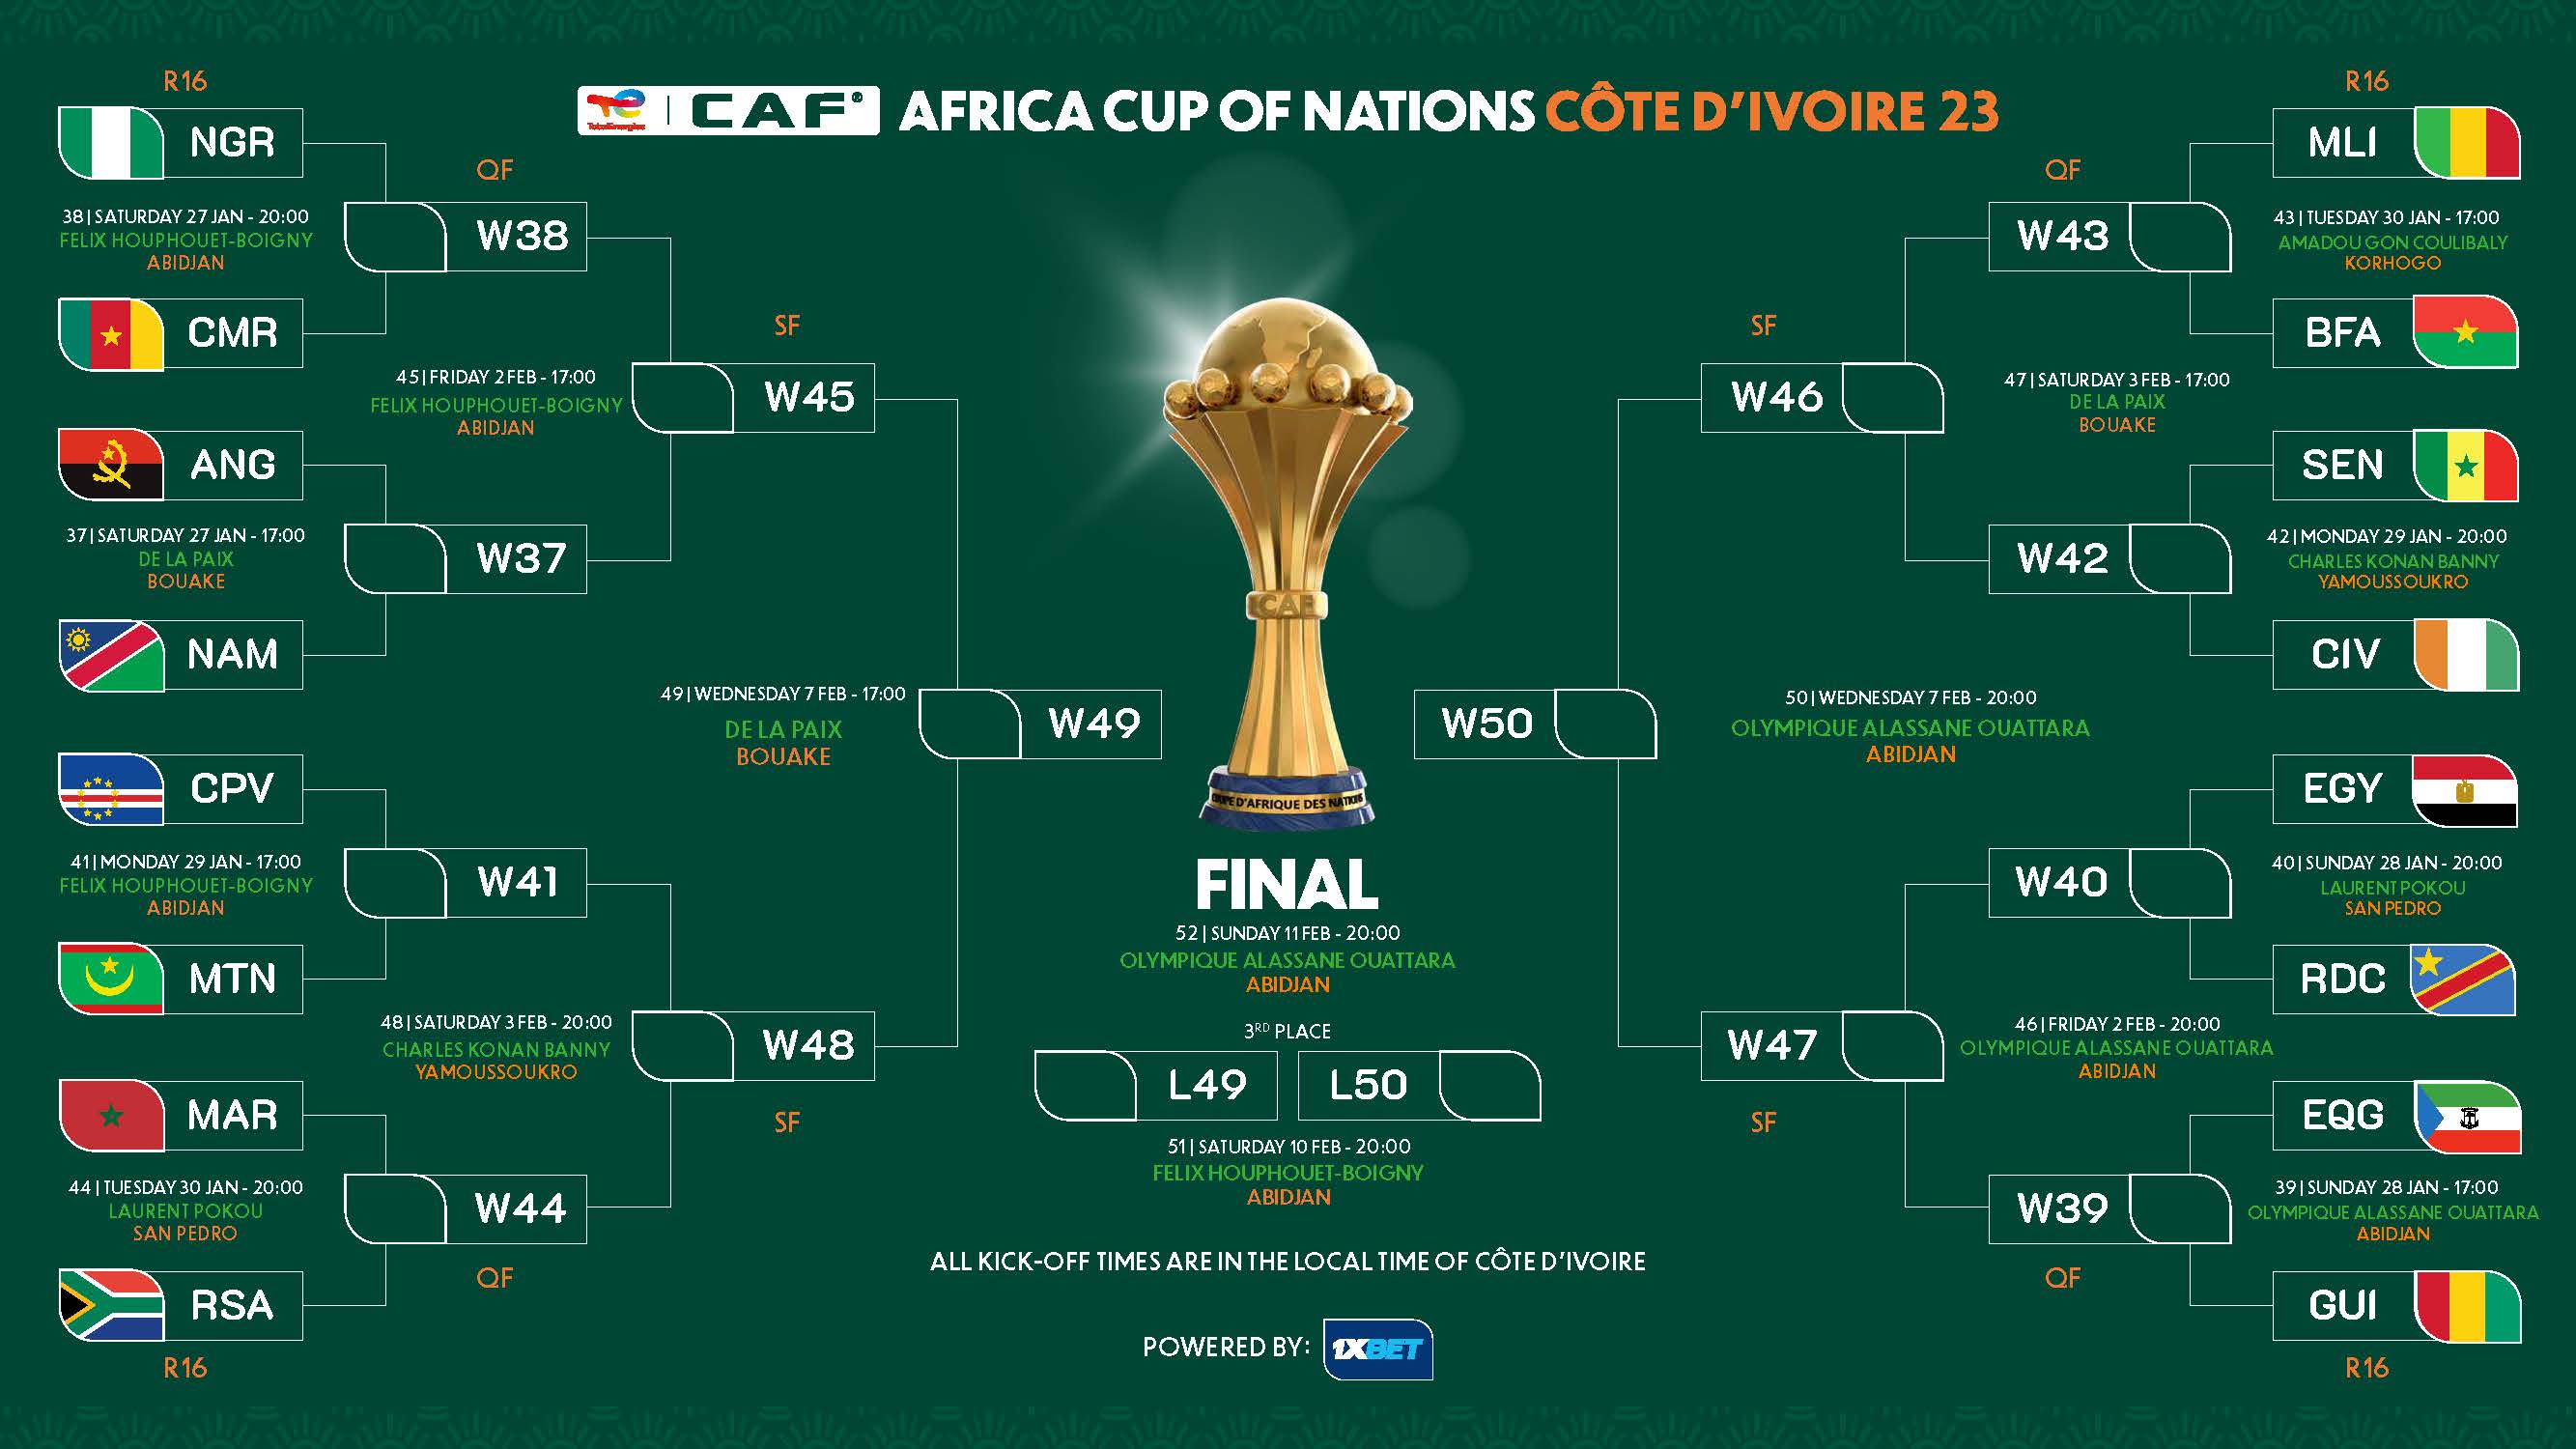 TotalEnergies CAF Africa Cup of Nations Cote d'Ivoire 2023 Round